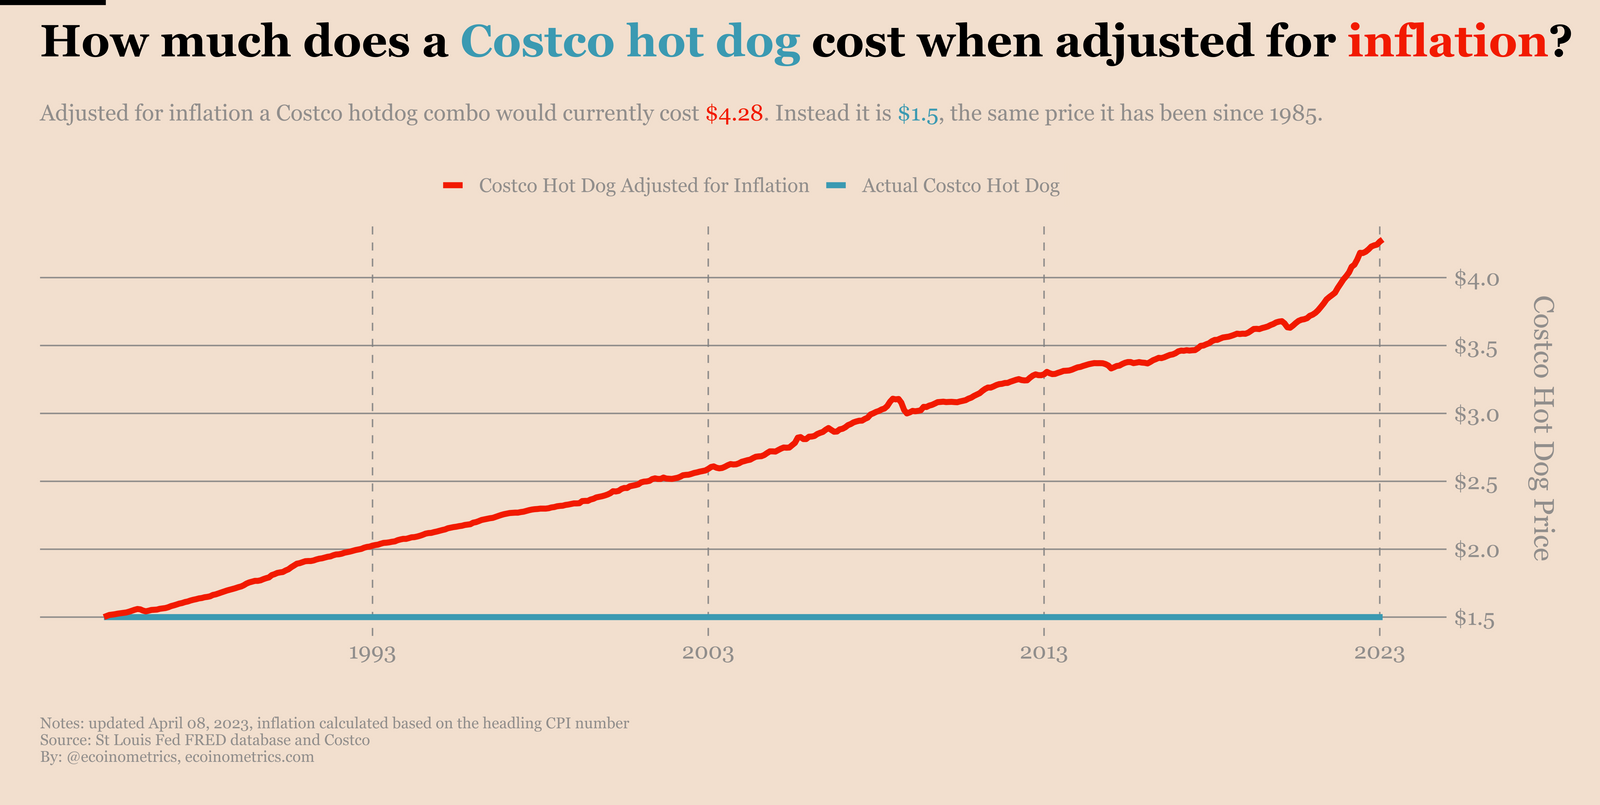 How much does a Costco hot dog cost when adjusted for inflation